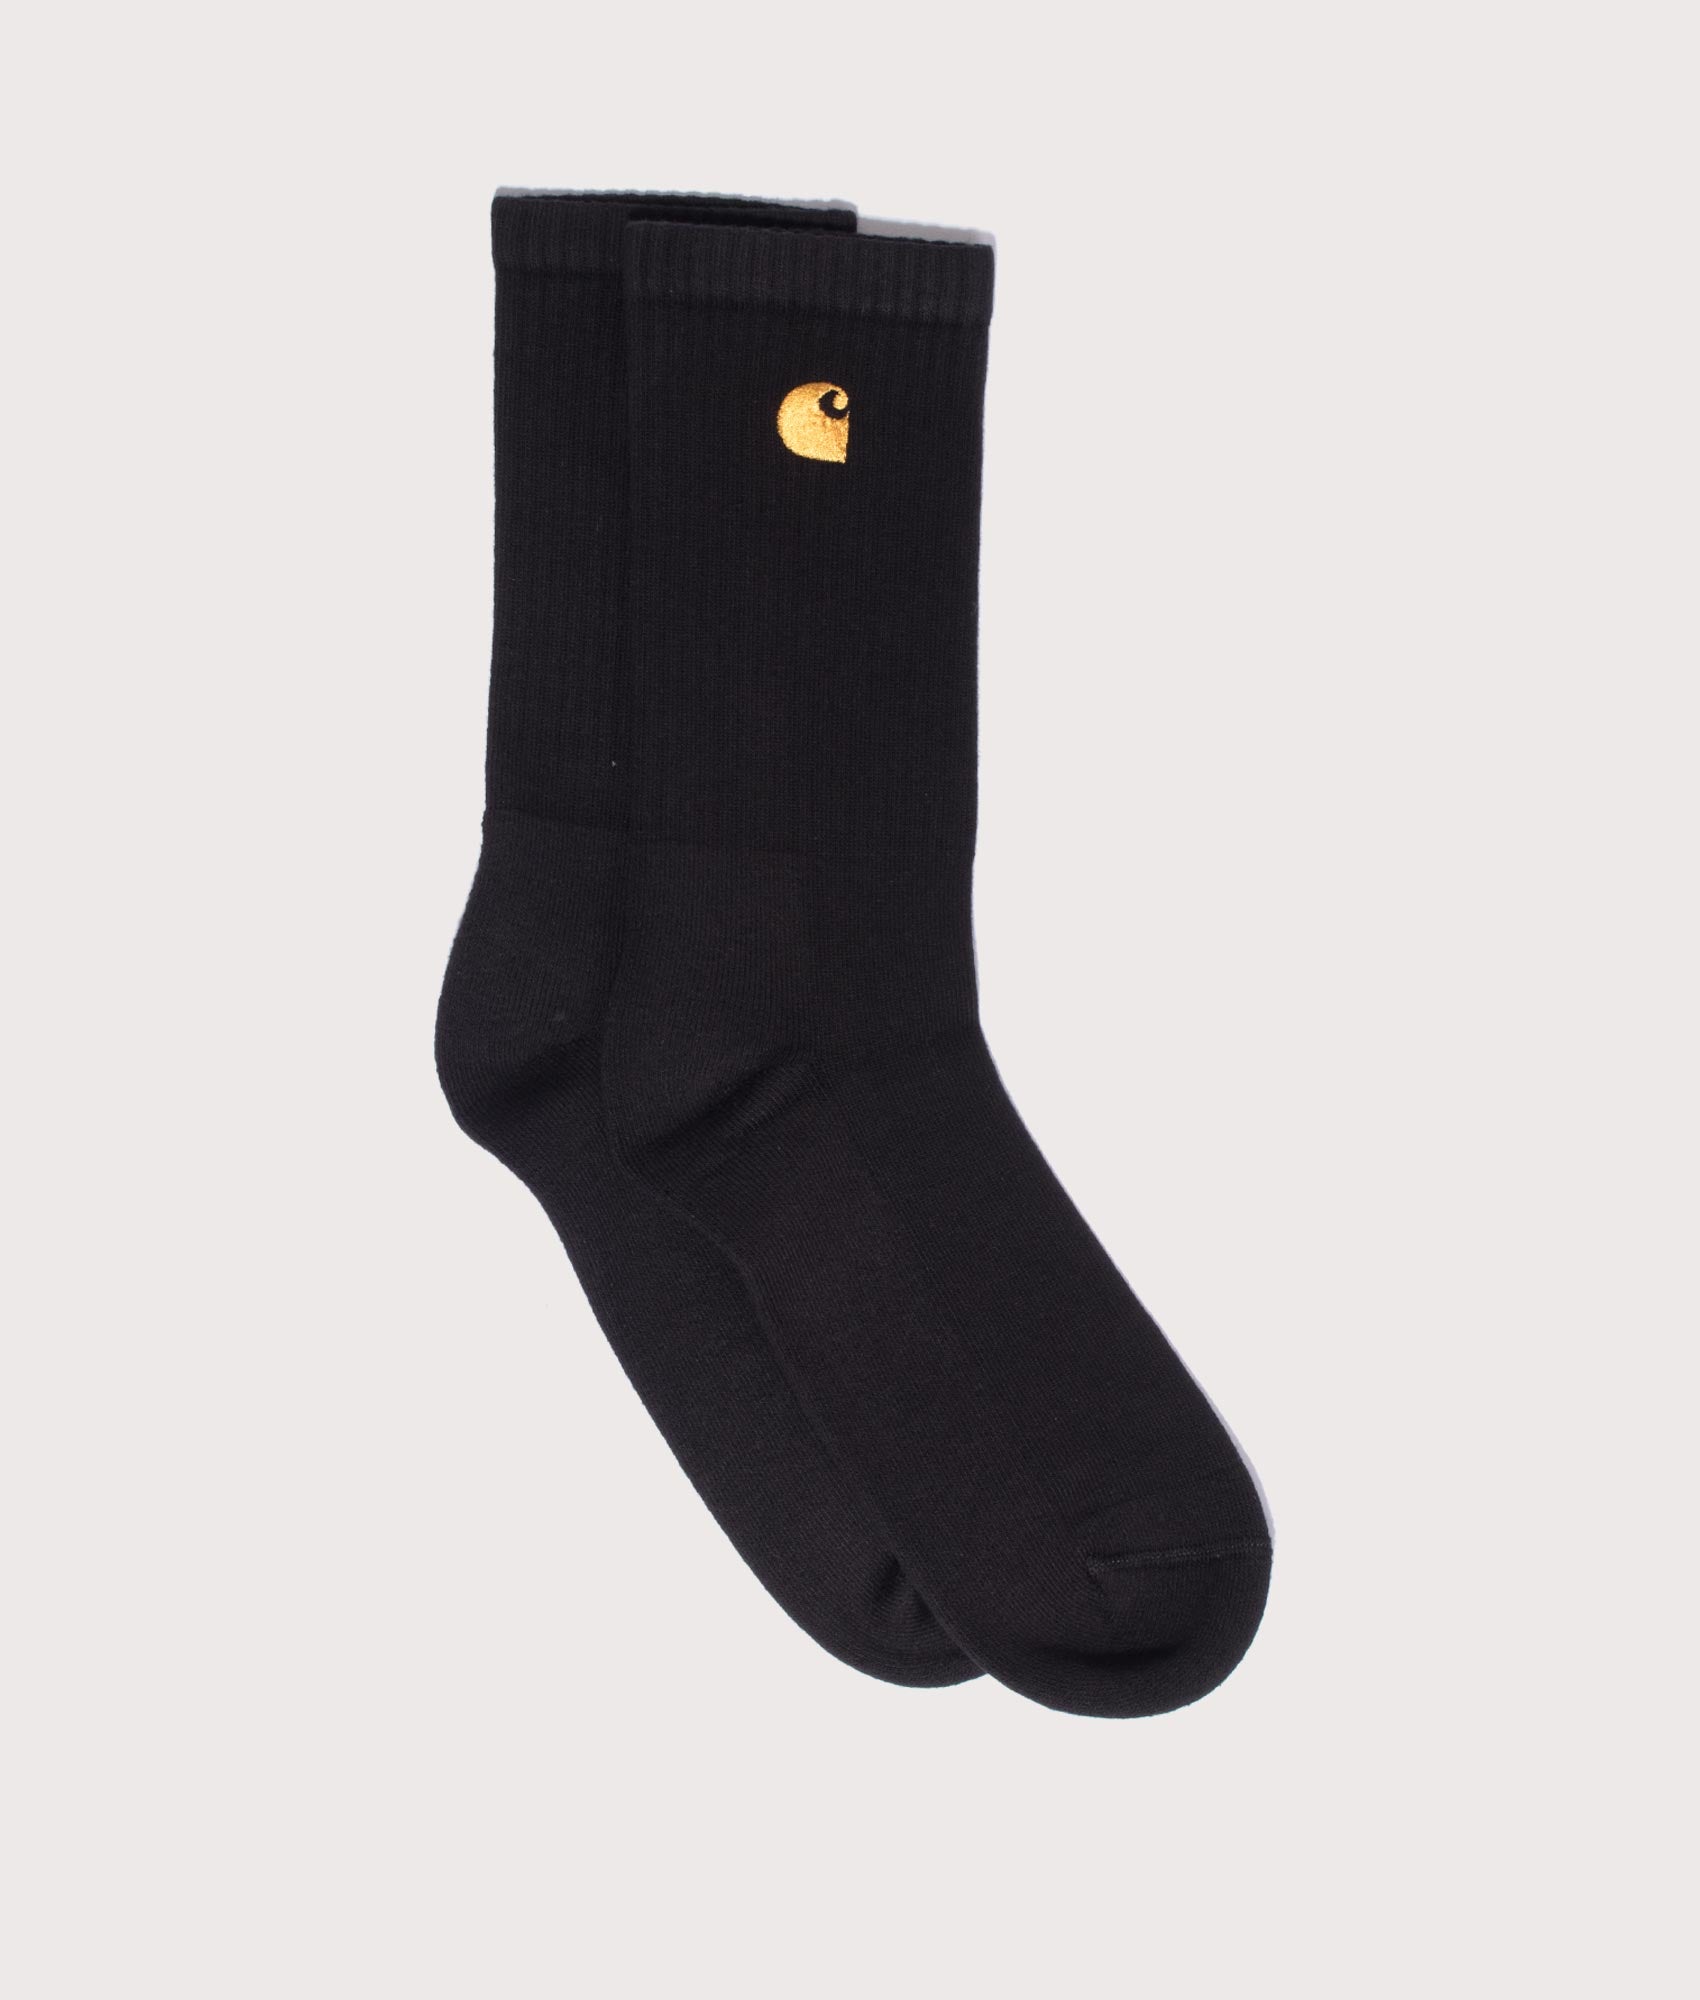 Carhartt WIP Mens Chase Socks - Colour: 00FXX Black/Gold - Size: One Size